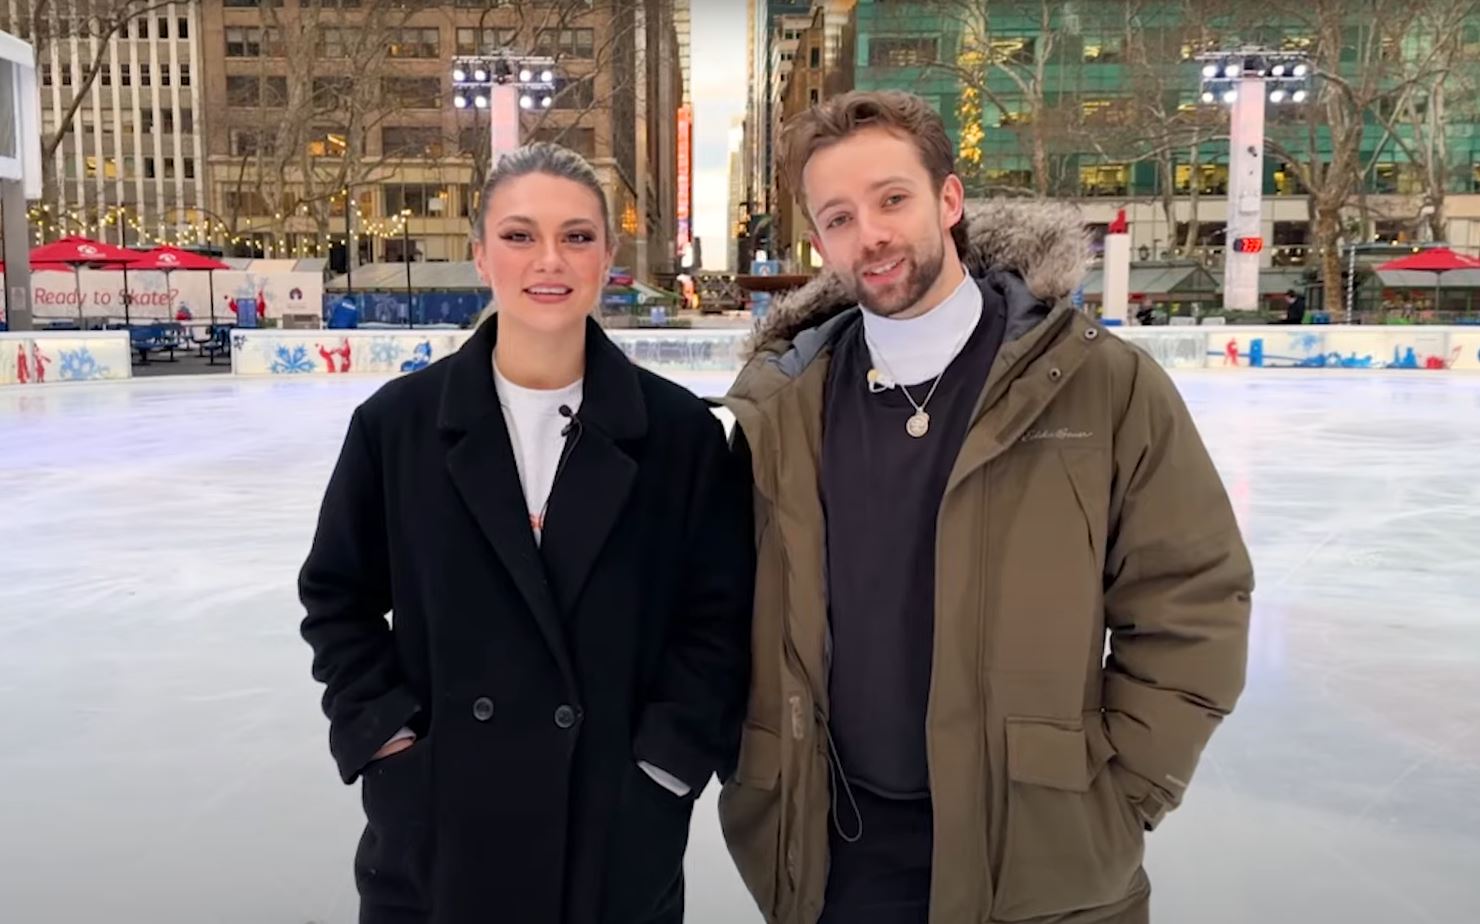 Two figure skaters wearing jackets stand on an ice rink.